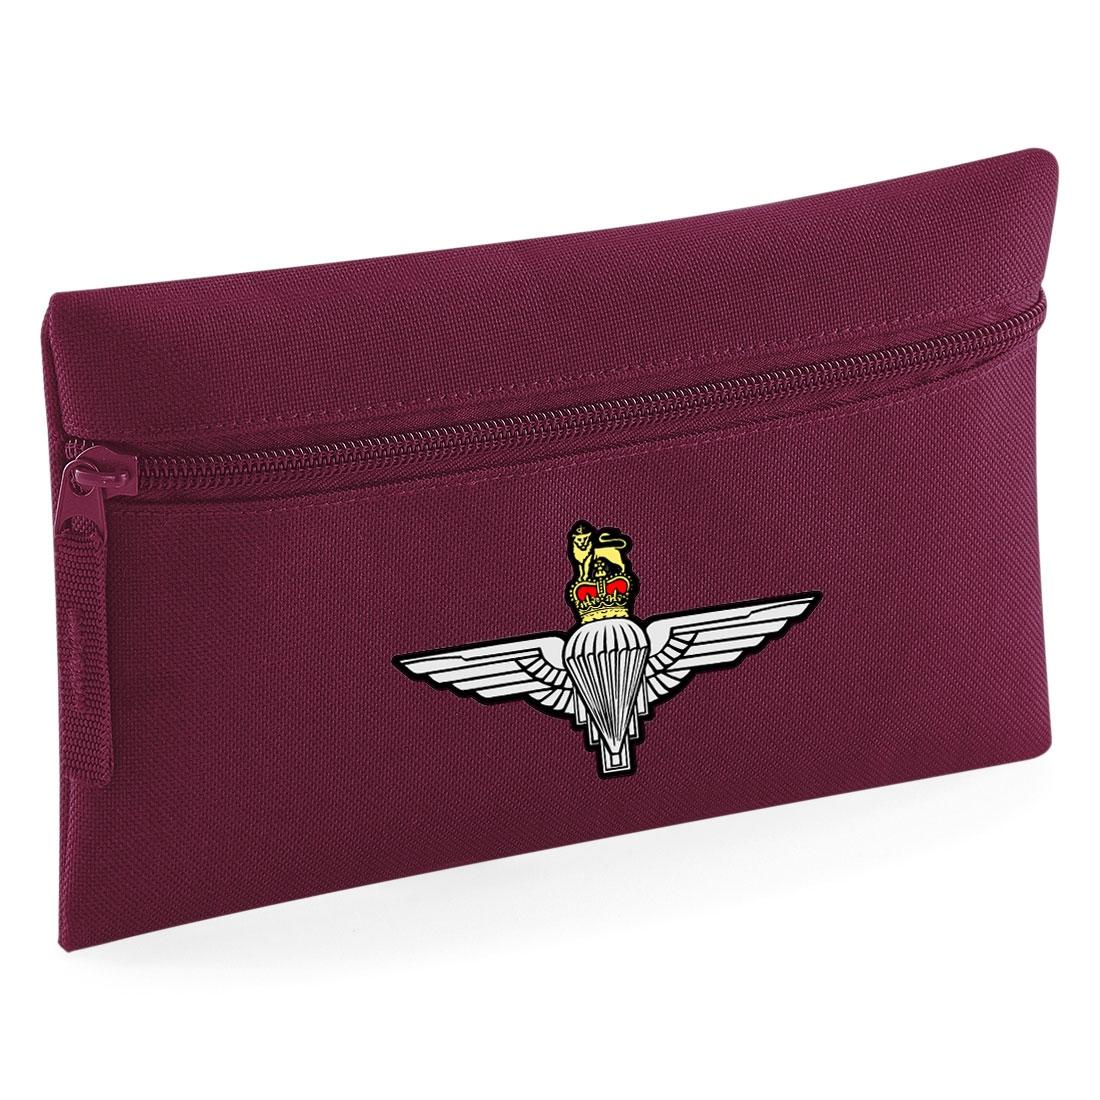 Multi Function Storage Pouch - Maroon